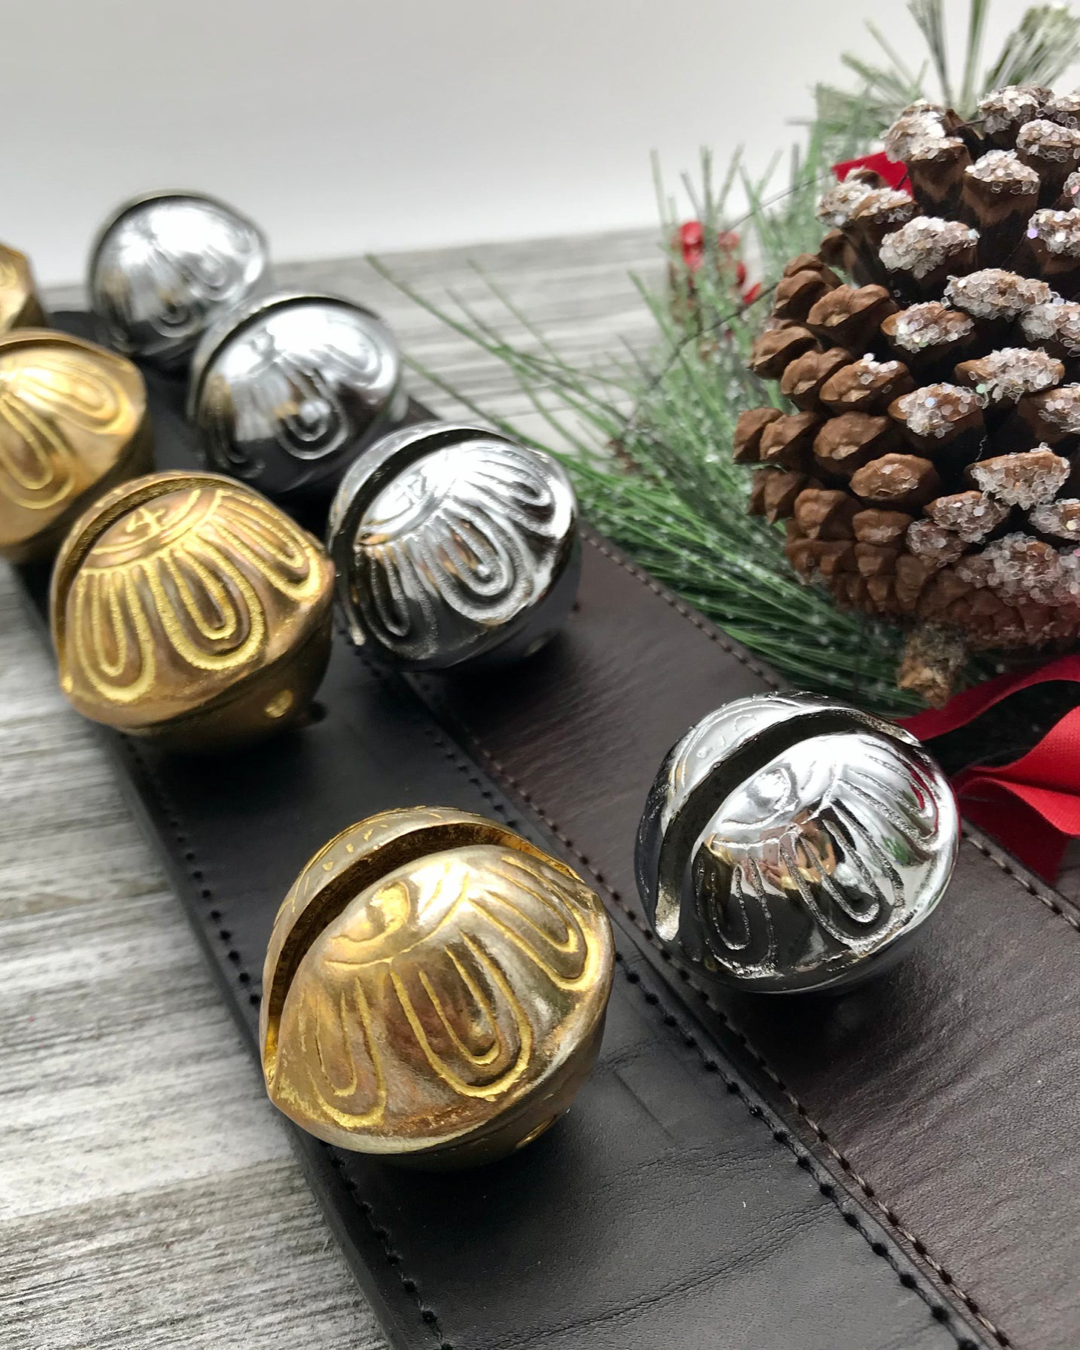 6 Authentic Graduating Solid Brass Sleigh Bells,Handmade Leather Sleigh Bells Set,Made In USA.